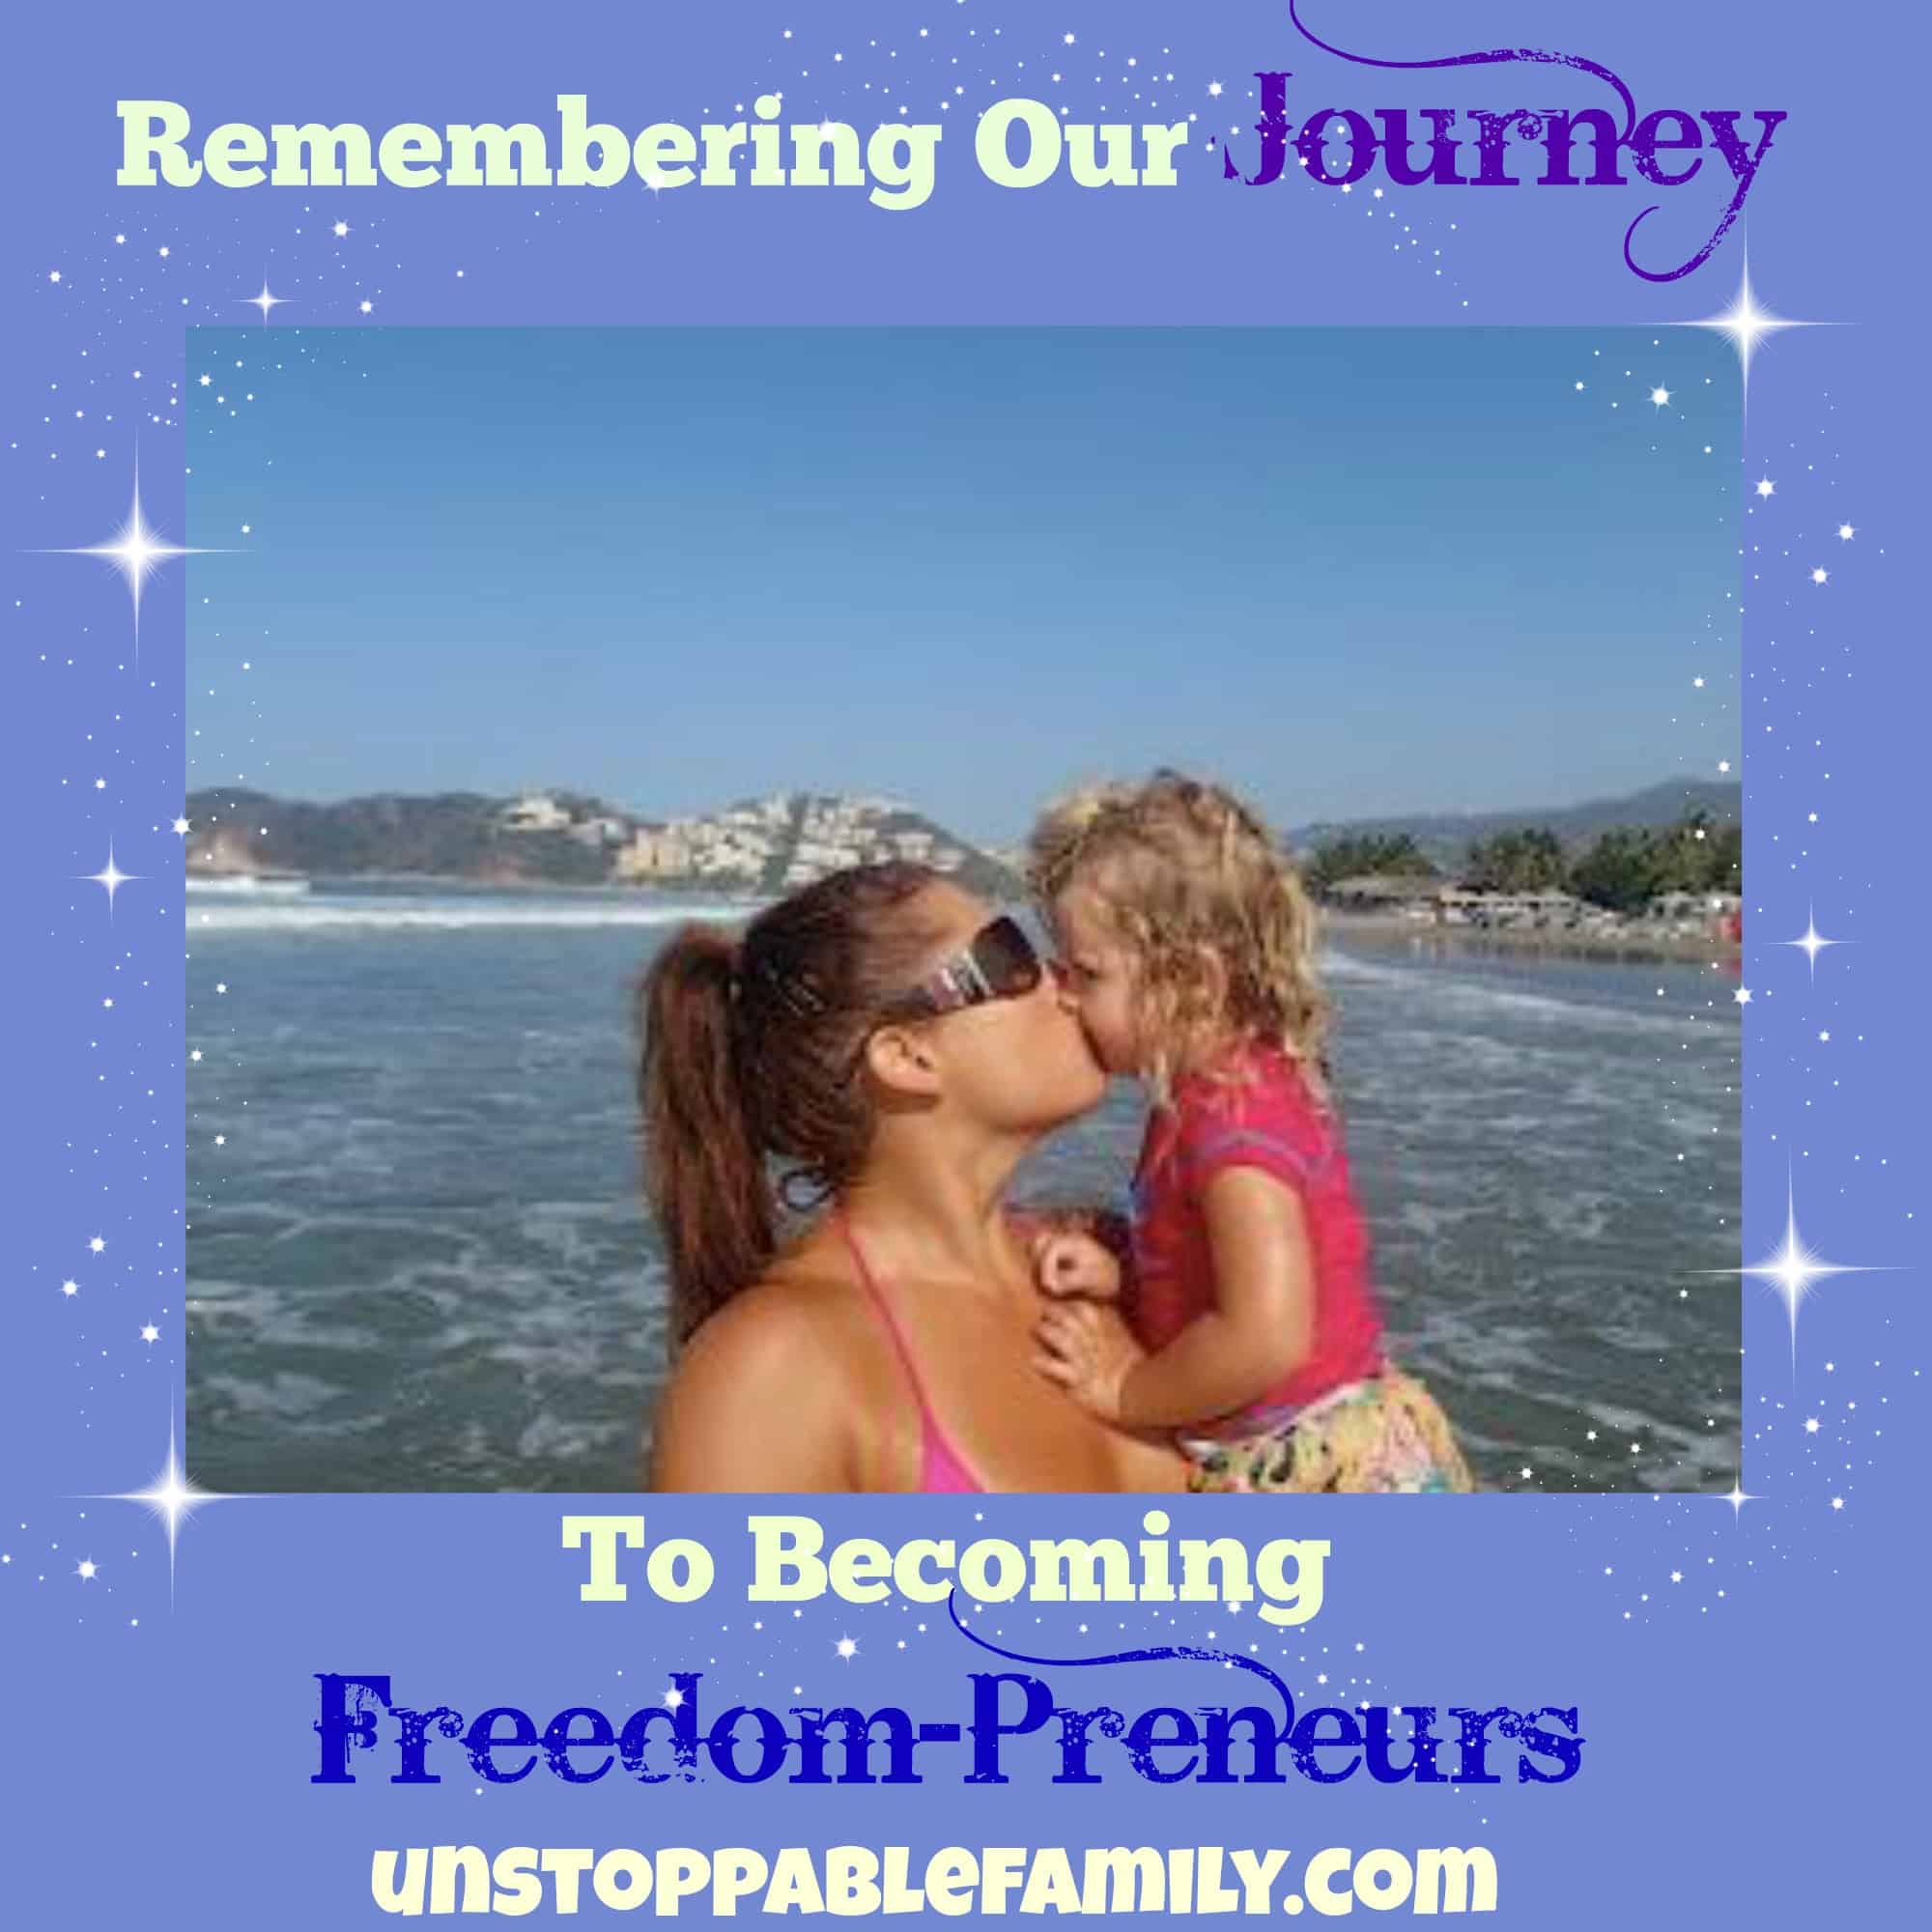 Remembering our journey to becoming freedom preneurs